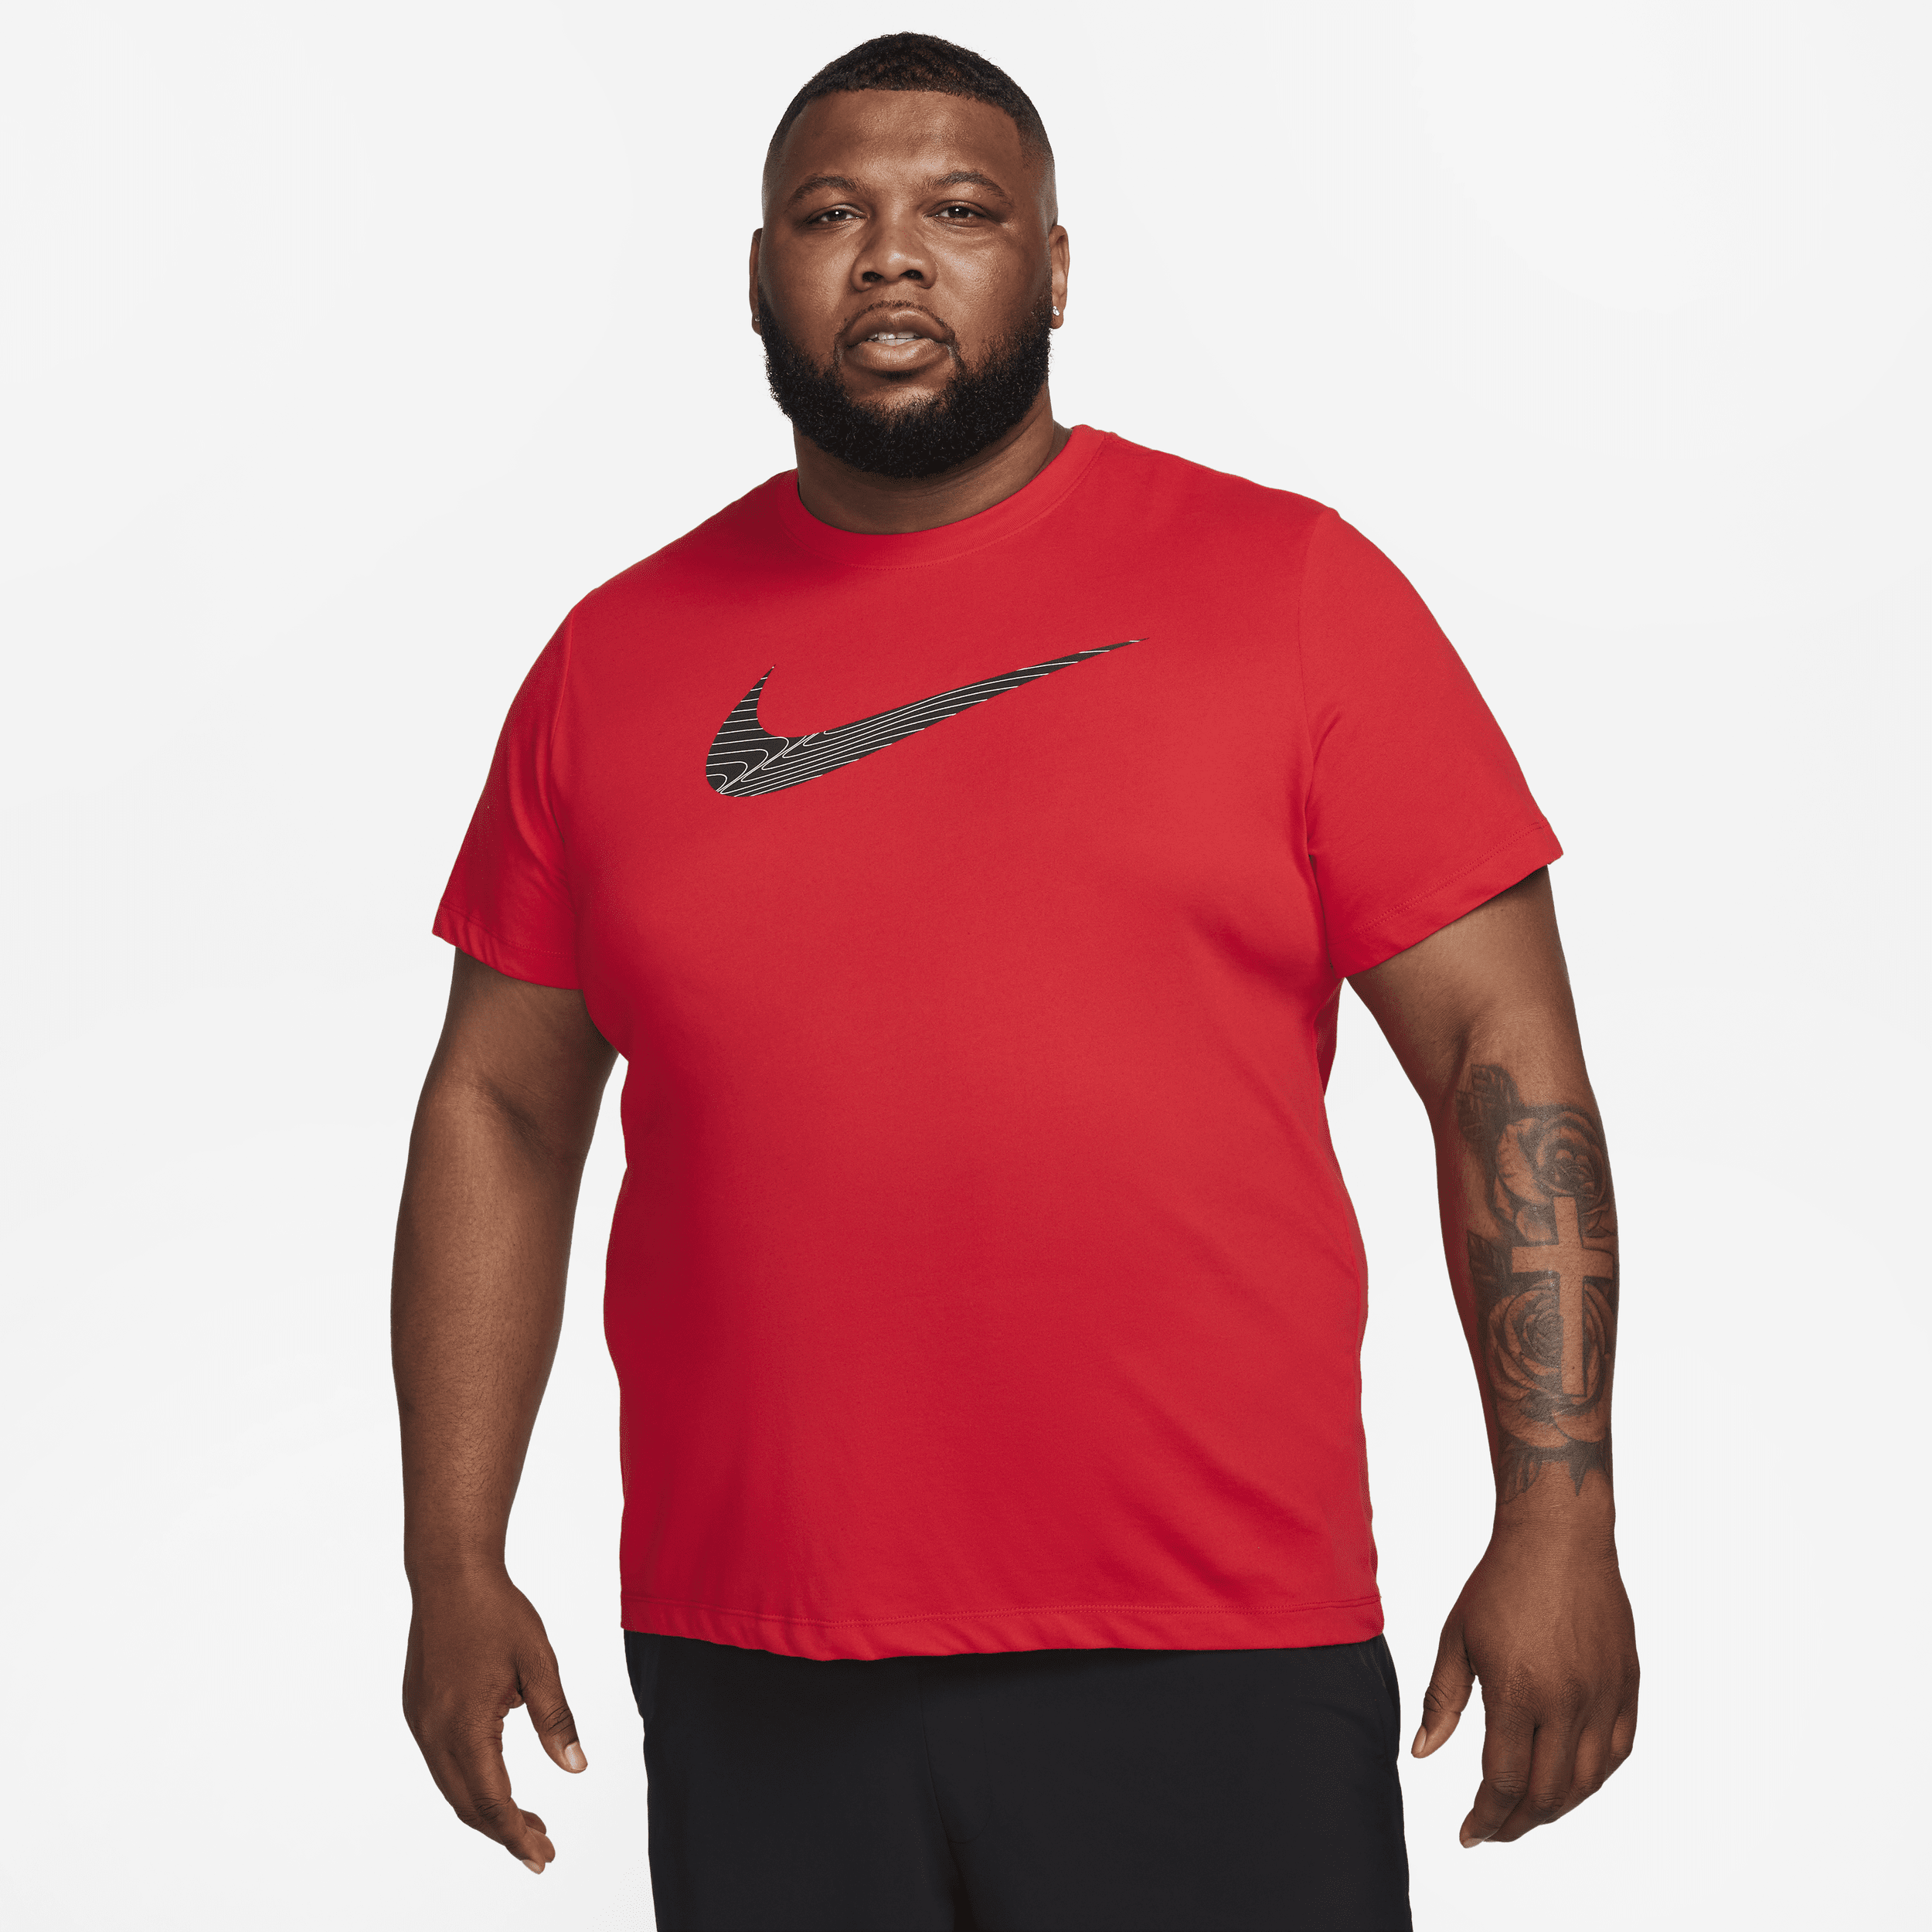 Nike Men's Dri-fit Fitness T-shirt In Red